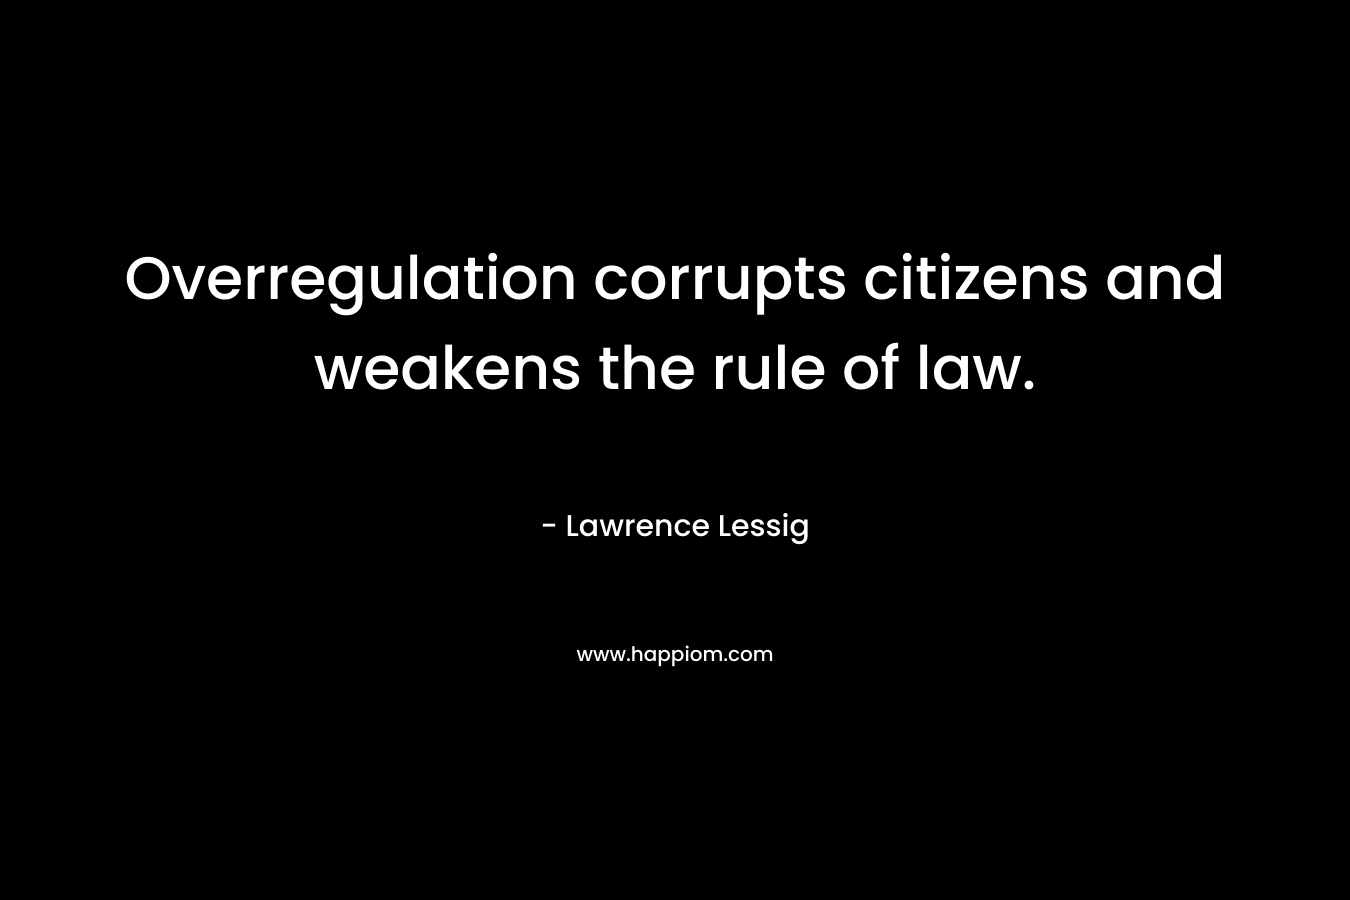 Overregulation corrupts citizens and weakens the rule of law.